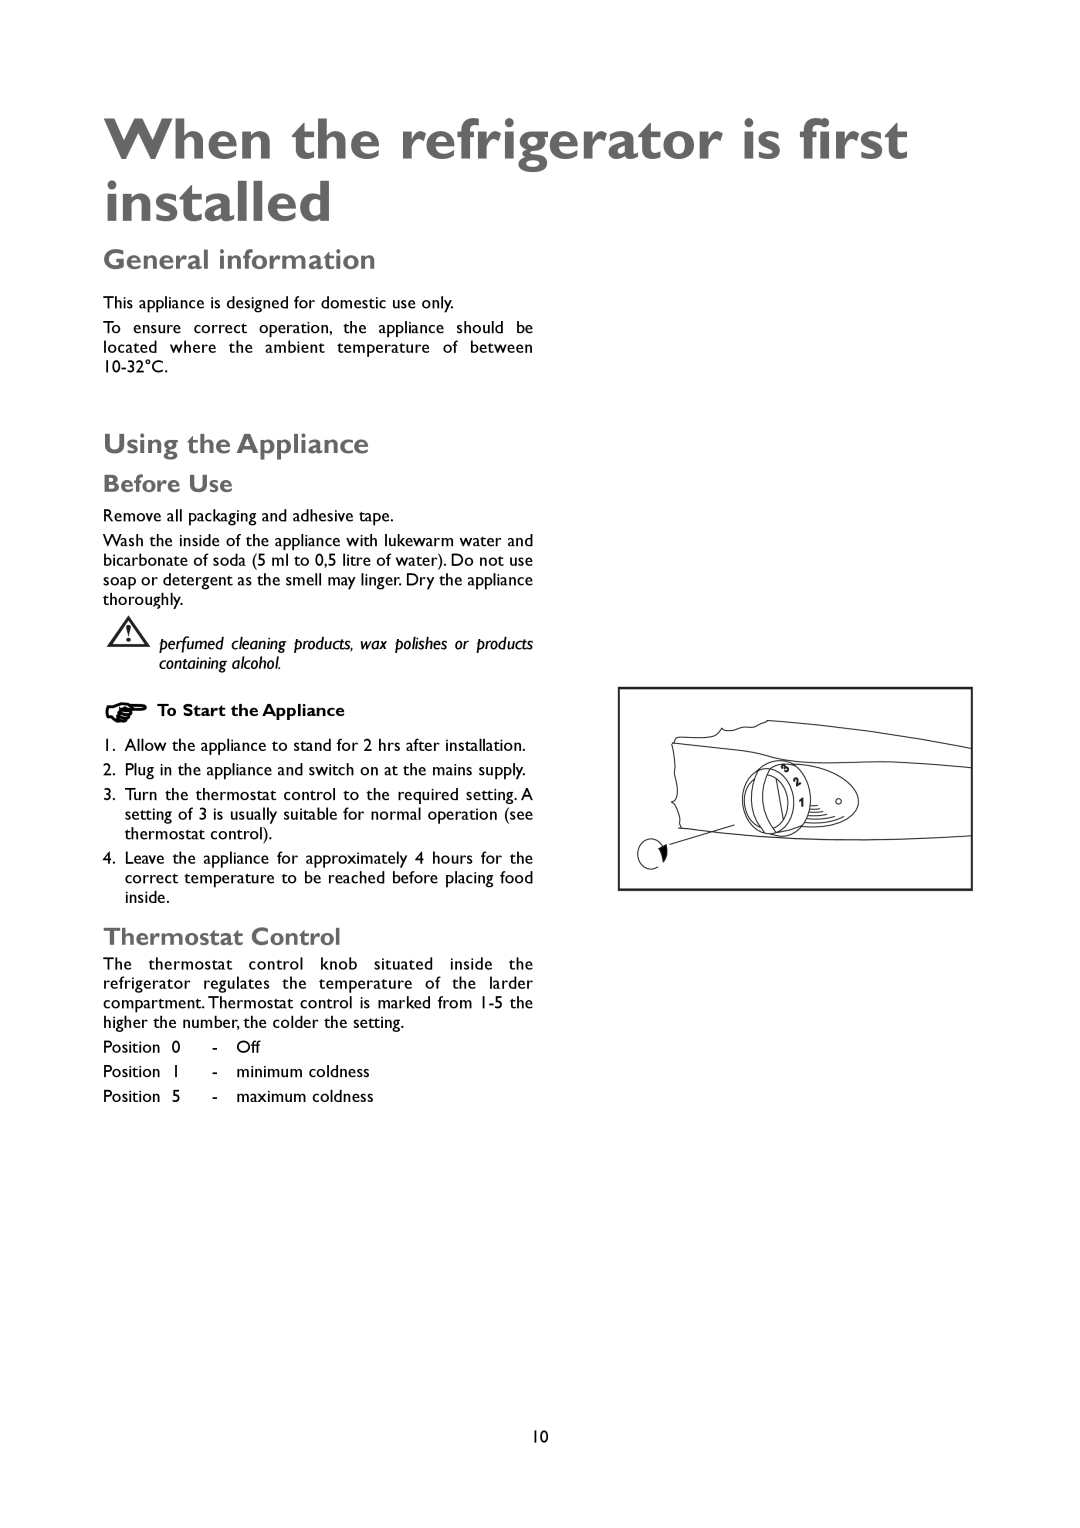 John Lewis JLUCLFW6003 When the refrigerator is first installed, General information, Using the Appliance 